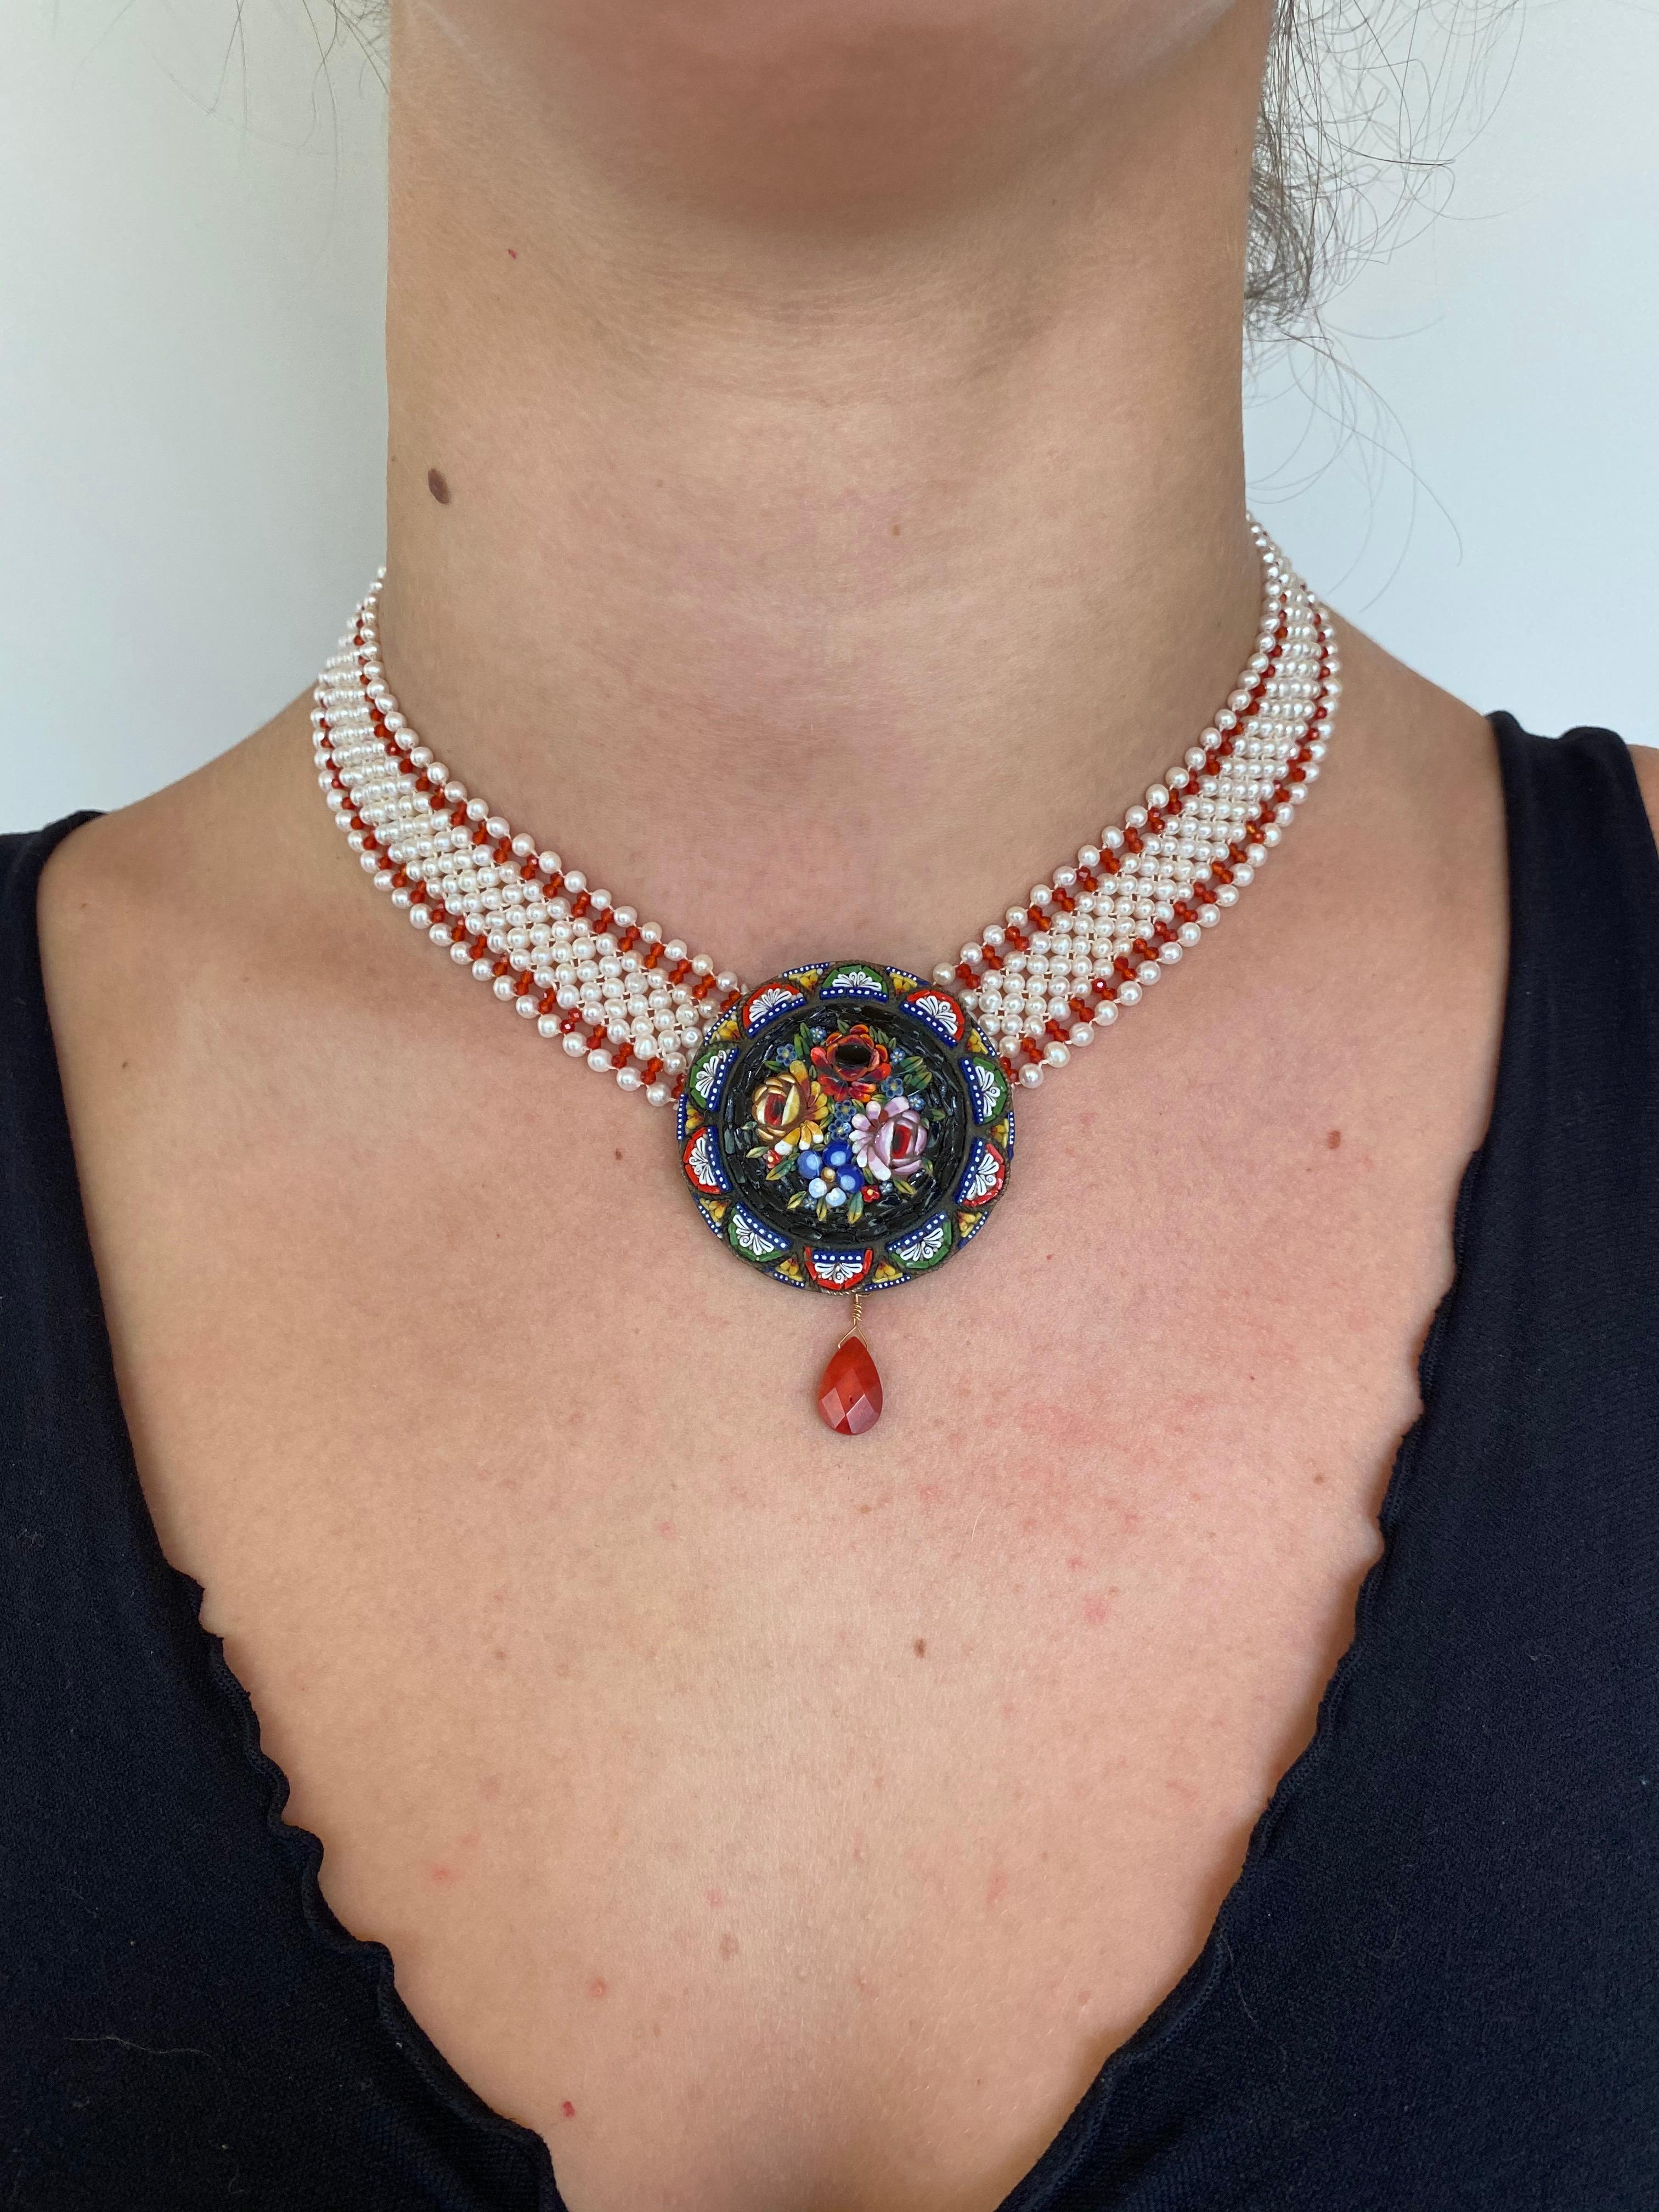 Bead Marina J. Woven Pearl and Carnelian Necklace with Mosaic Centerpiece and Coral